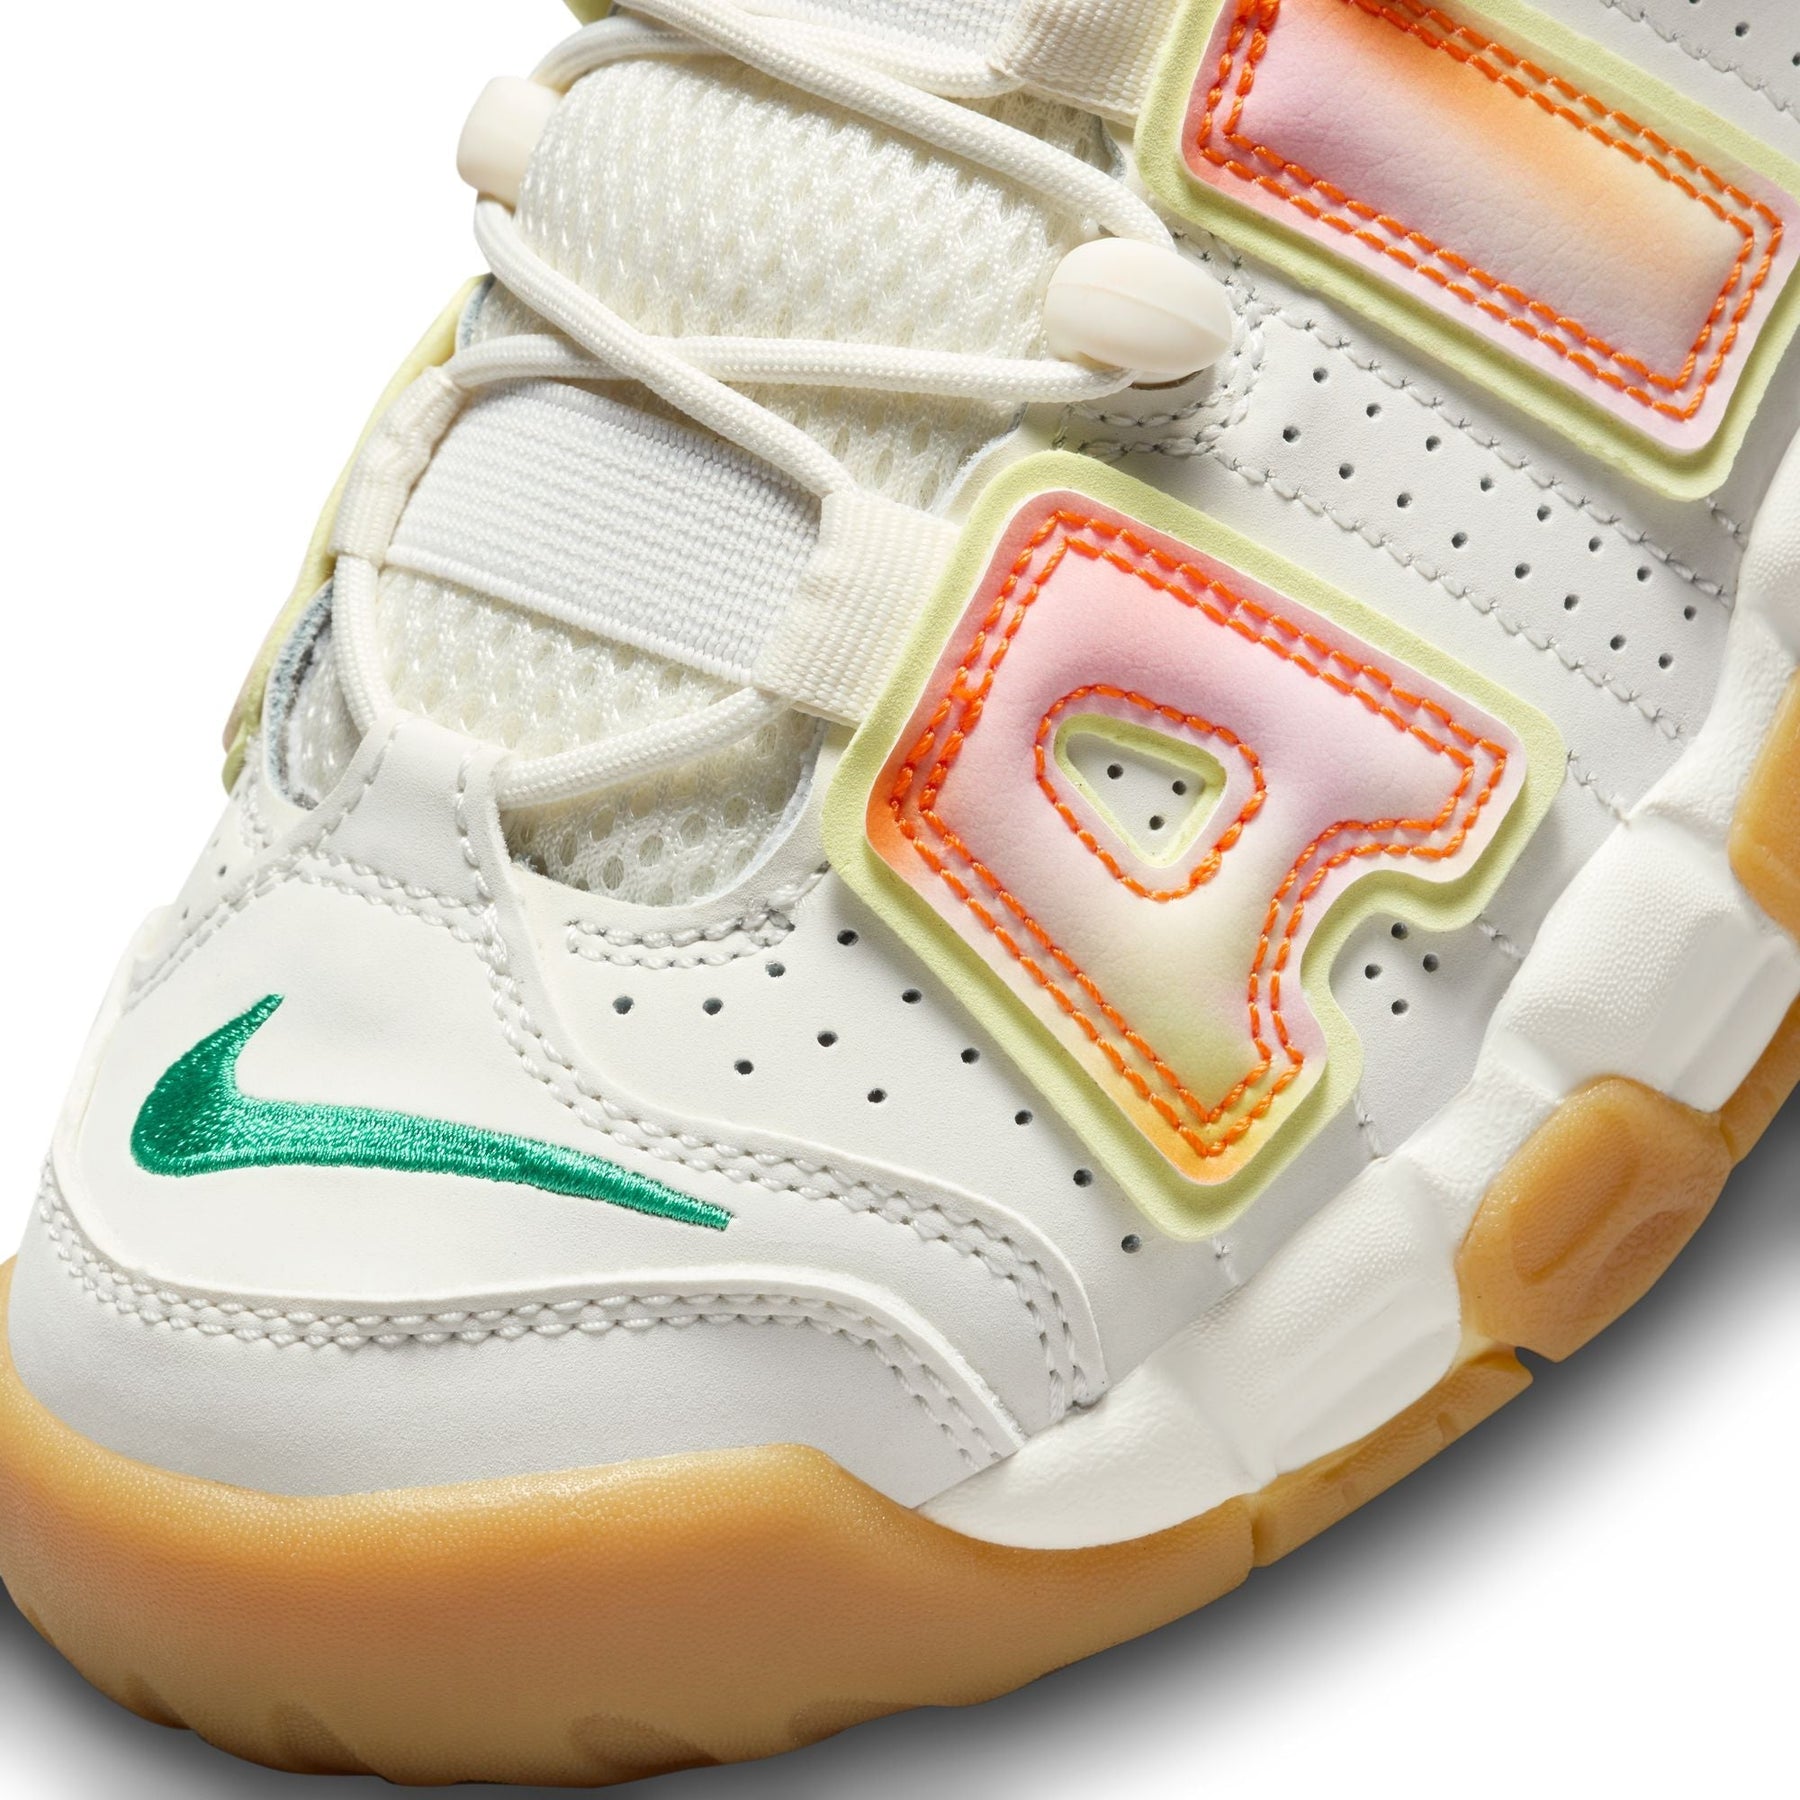 Nike Air More Uptempo "Everything You Need" Grade School - Kids